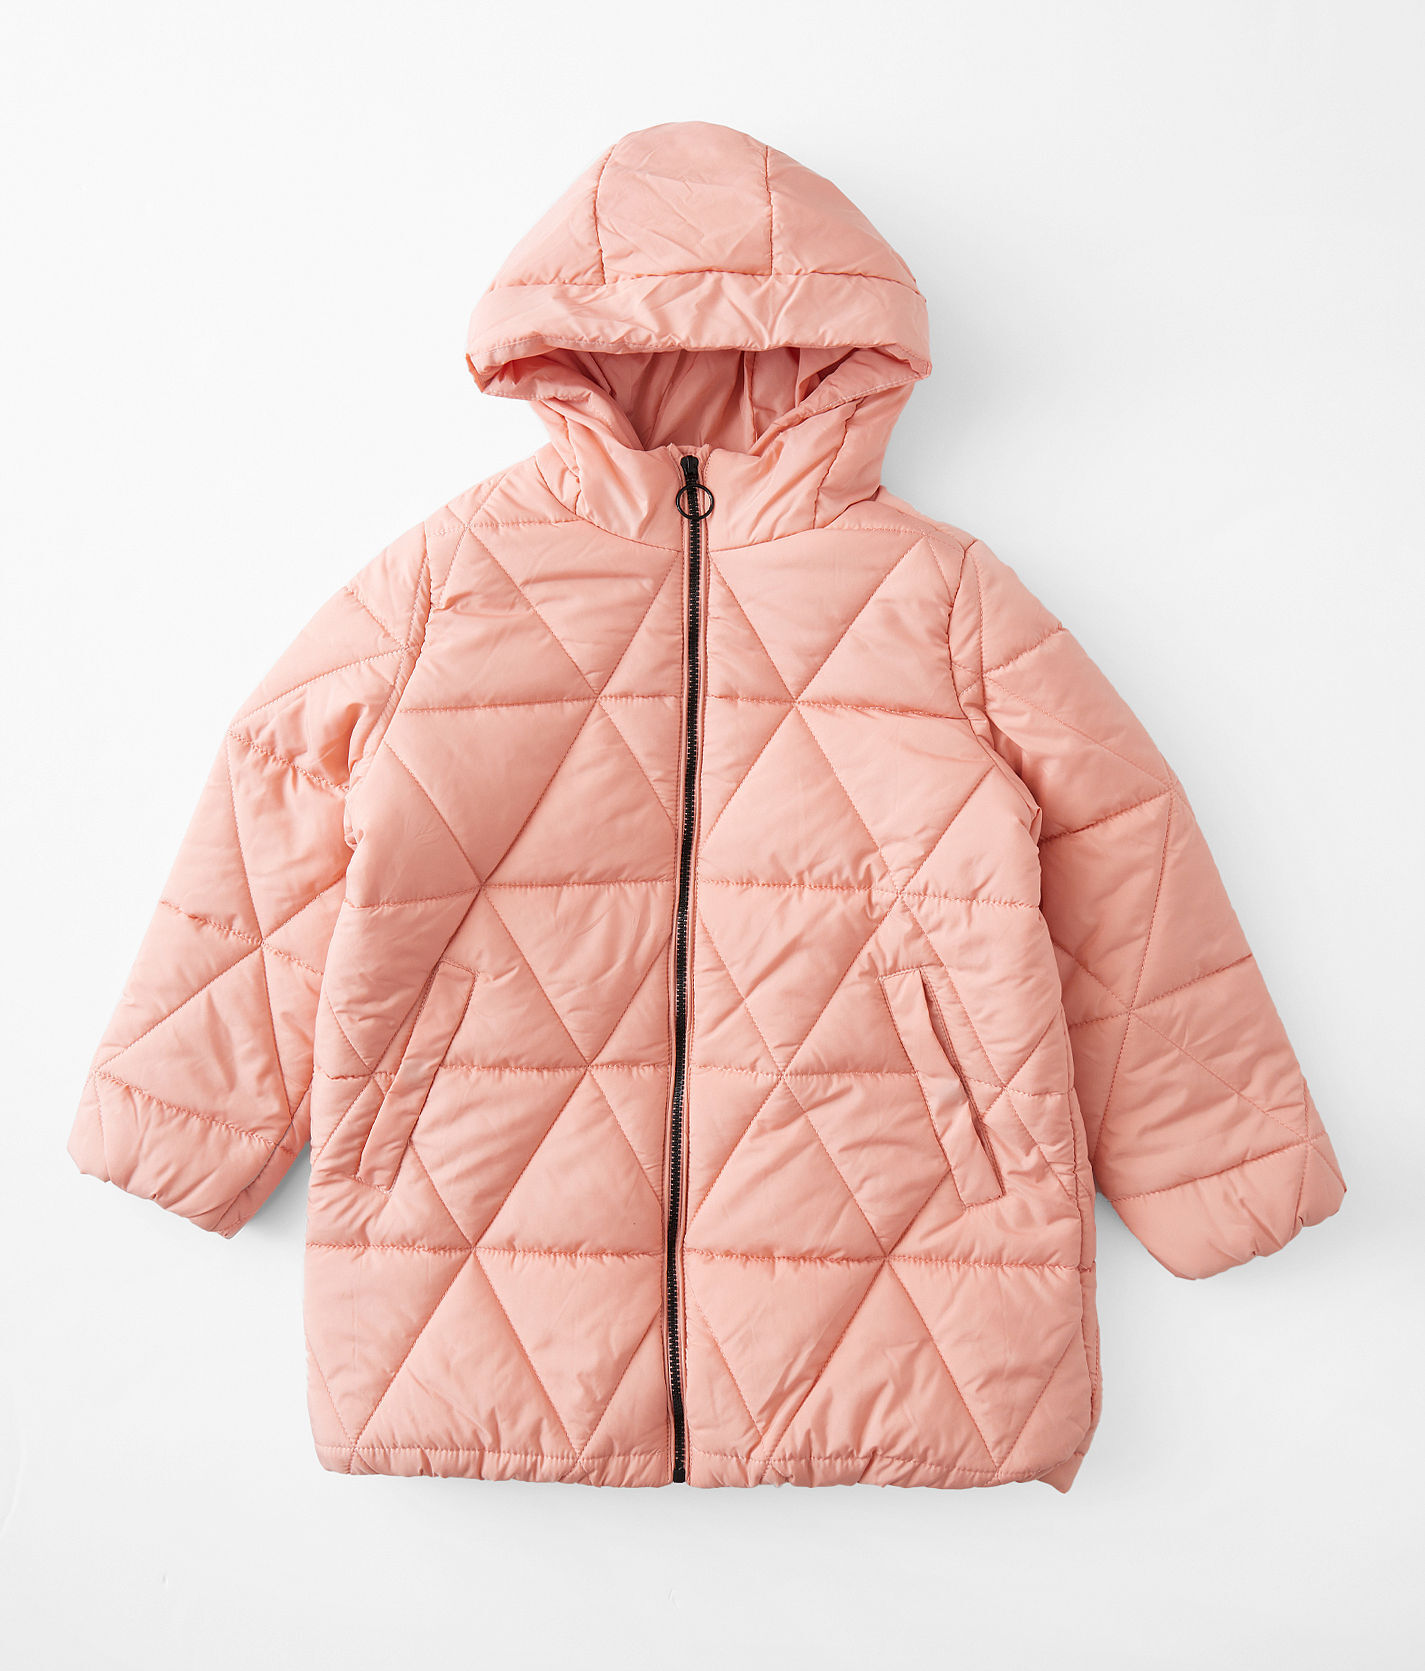 Girls - Urban Republic Quilted Puffer Coat  - Pink - female - Size: Small